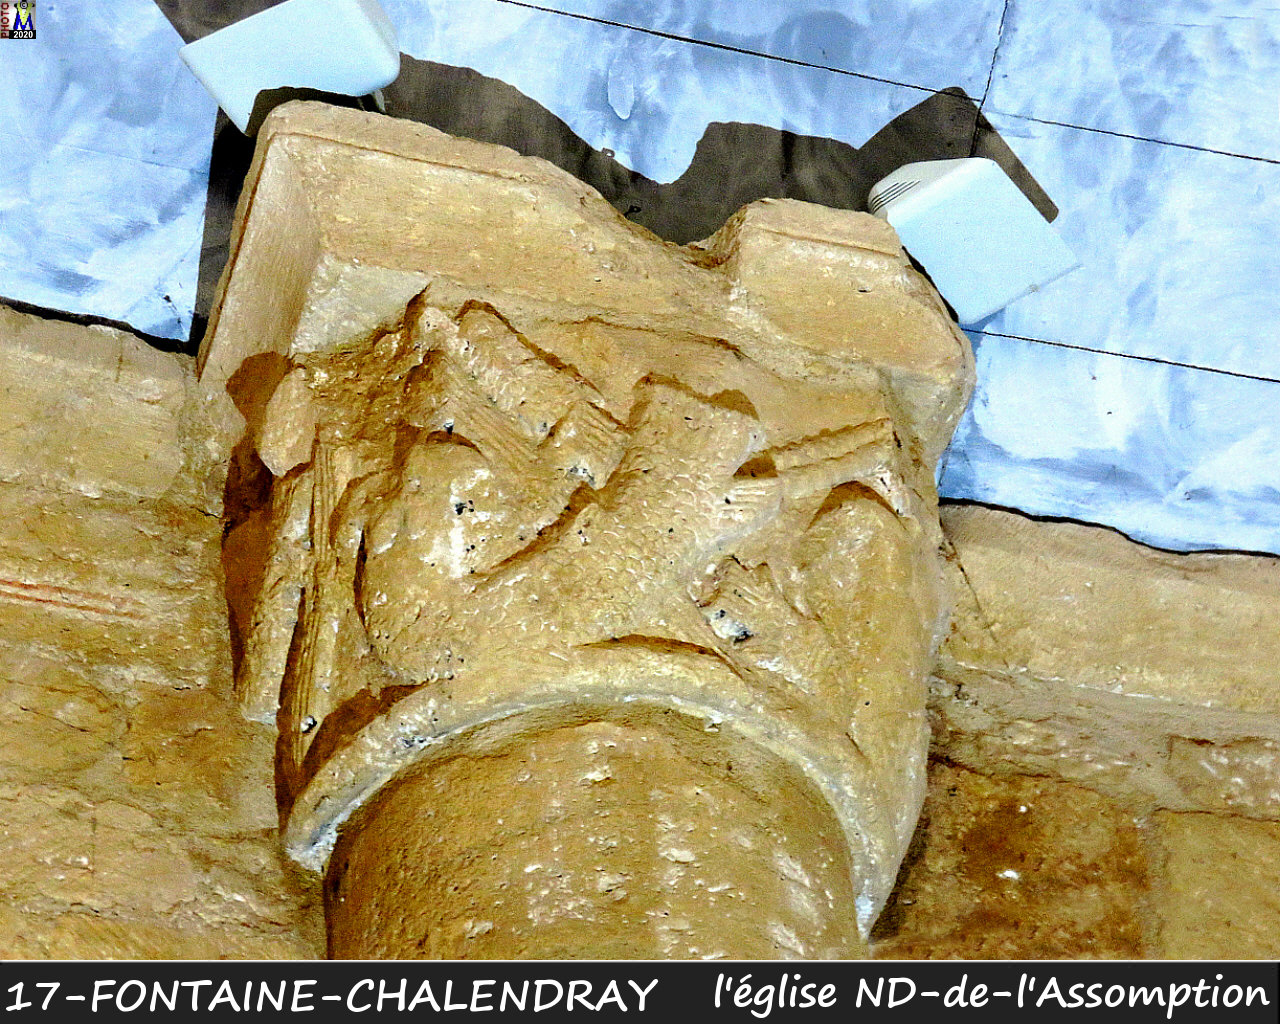 17FONTAINE-CHALENDRAY_eglise_1114.jpg